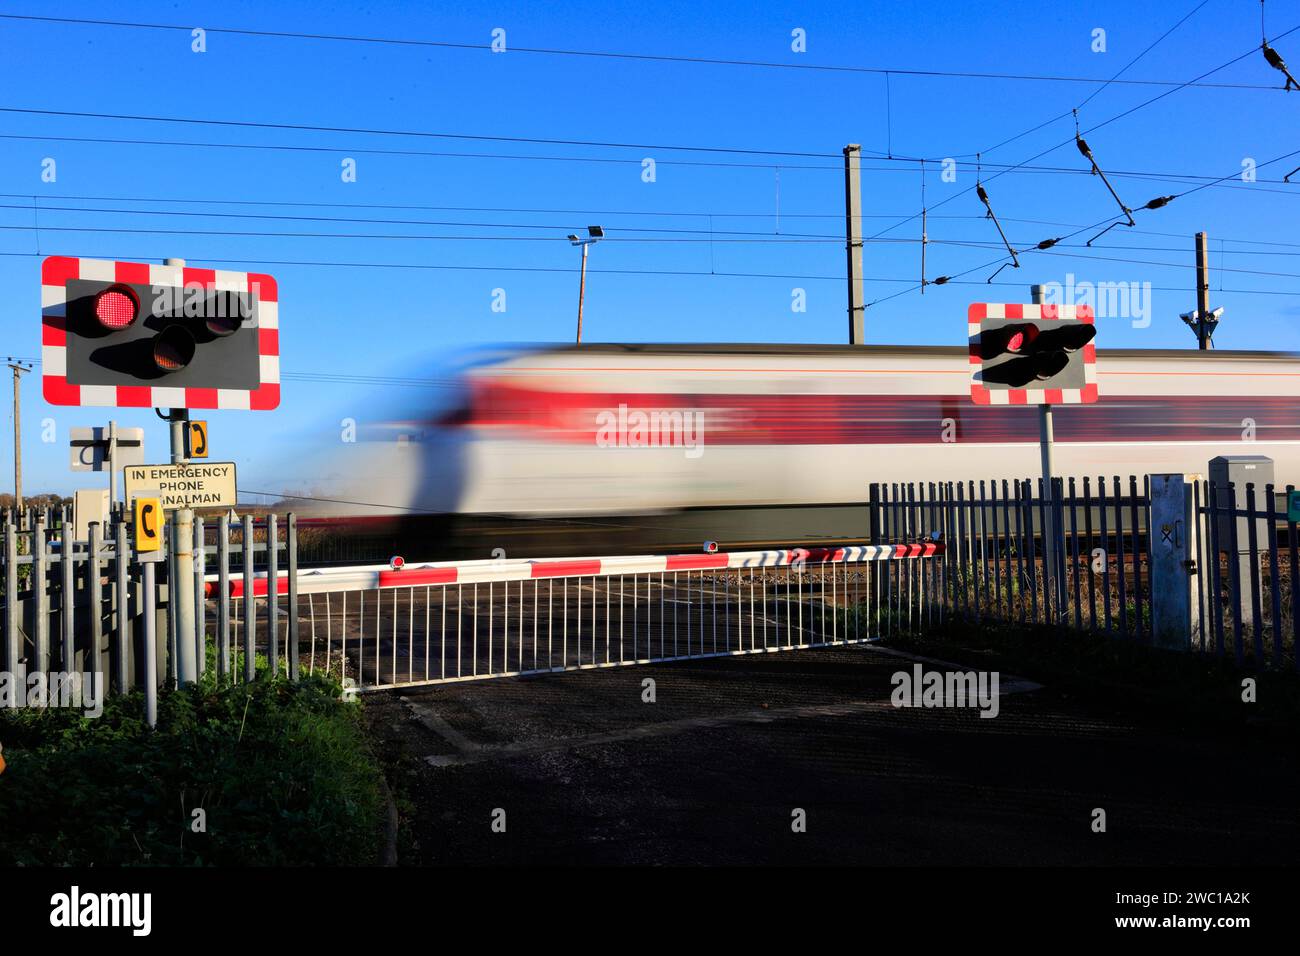 An Azuma train passing red lights at an unmanned Level crossing, East Coast Main Line Railway, Holme, Cambridgeshire, England, UK Stock Photo